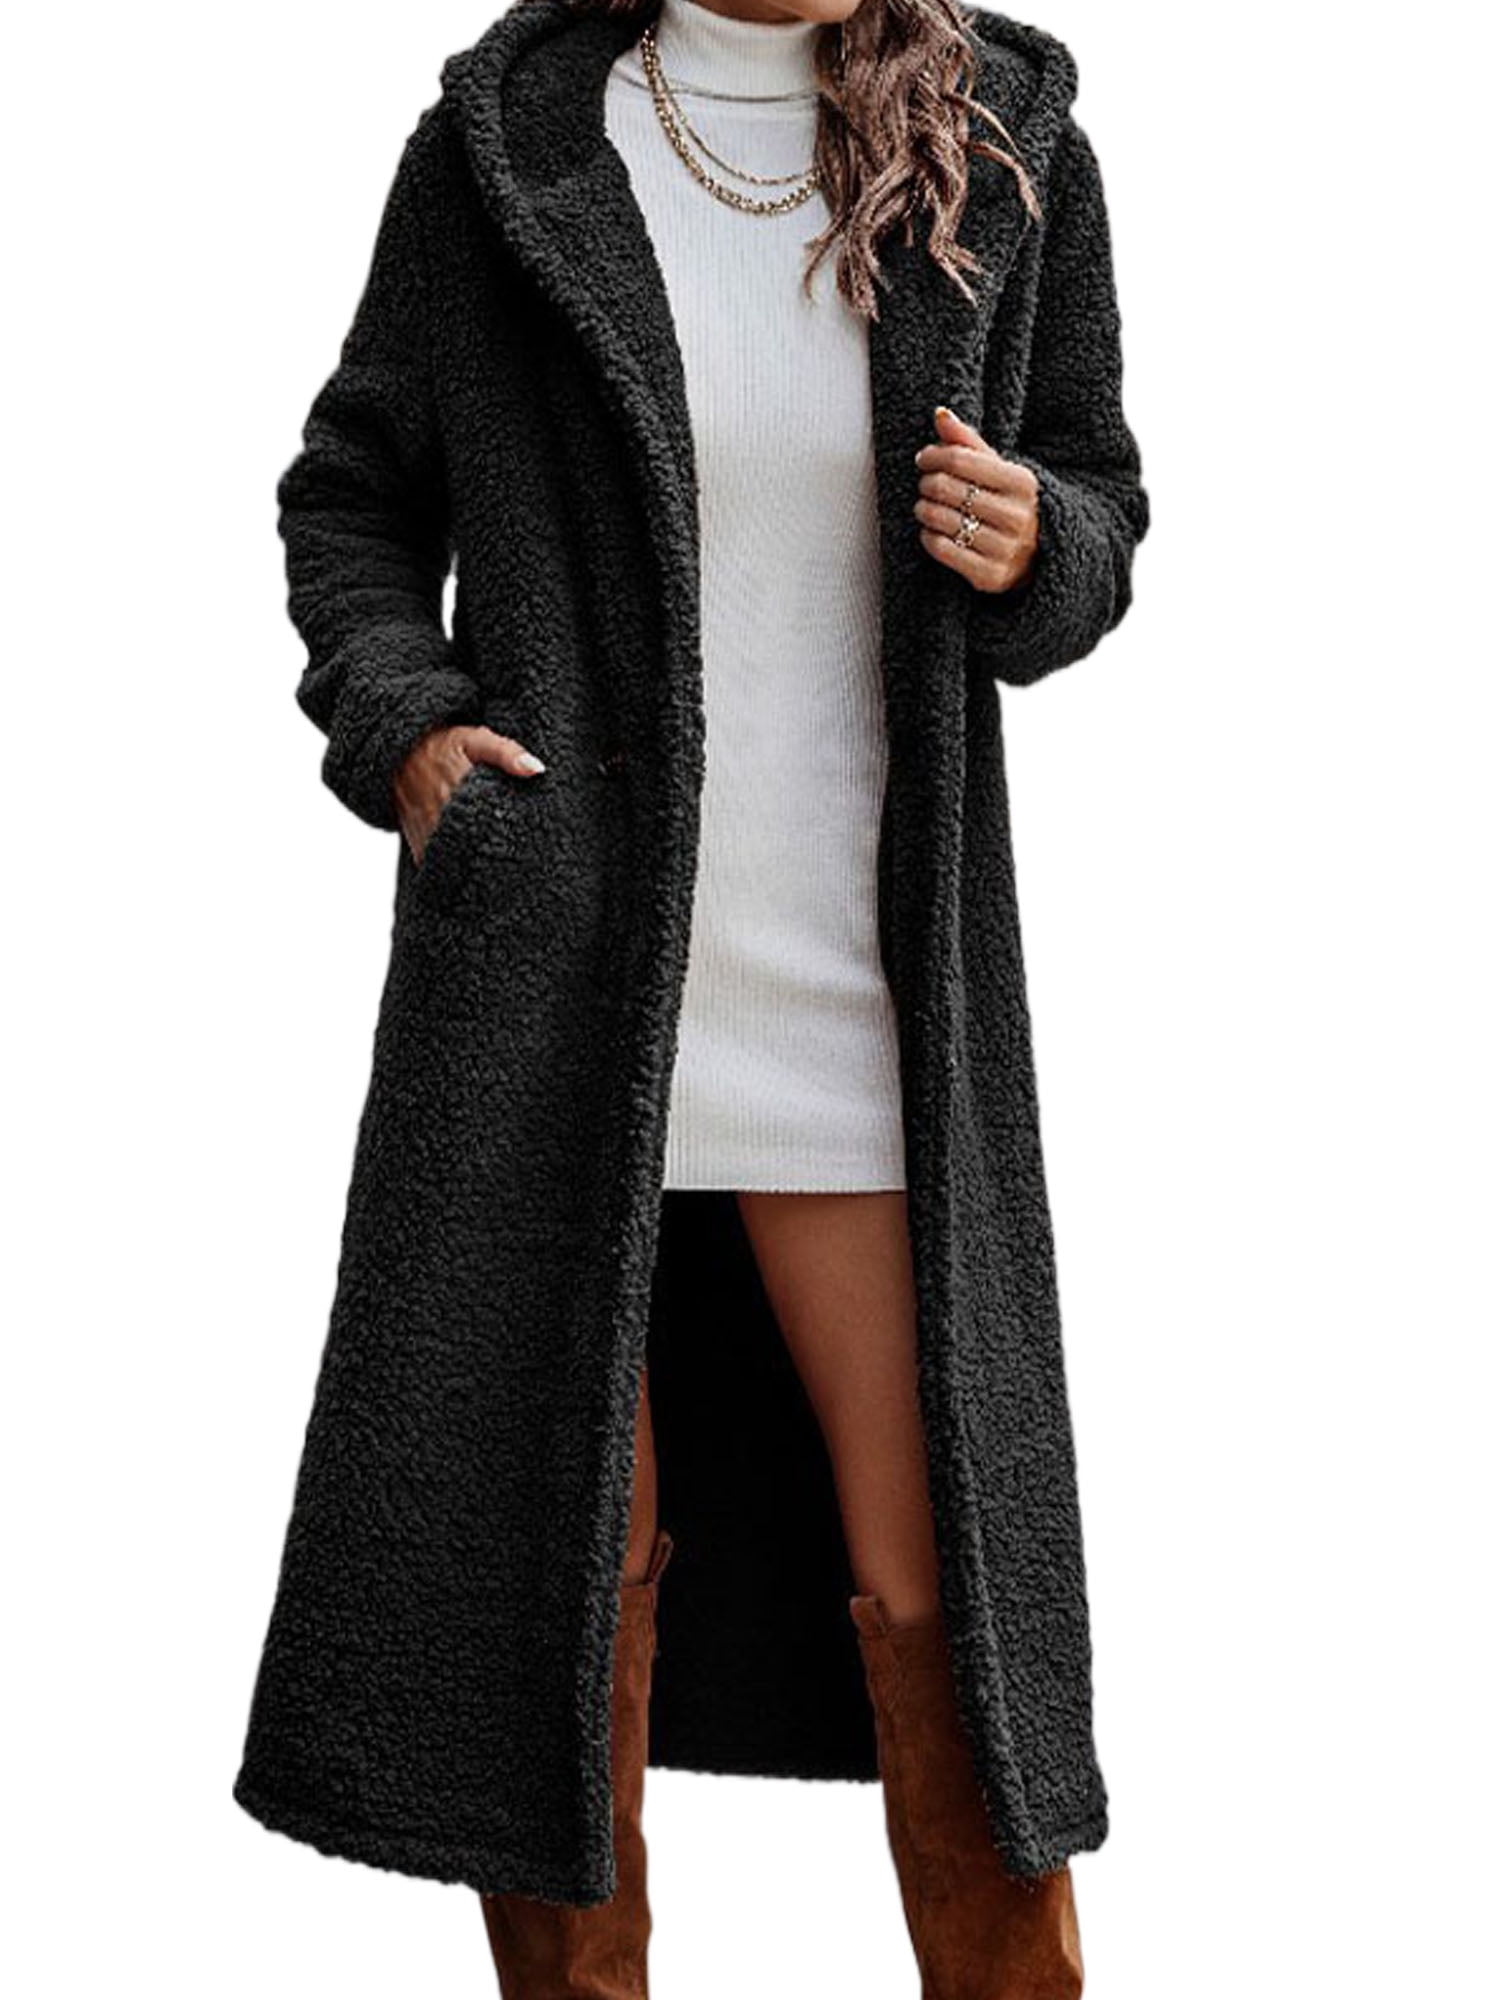 Women's Syhood Clothing gifts - at $7.99+